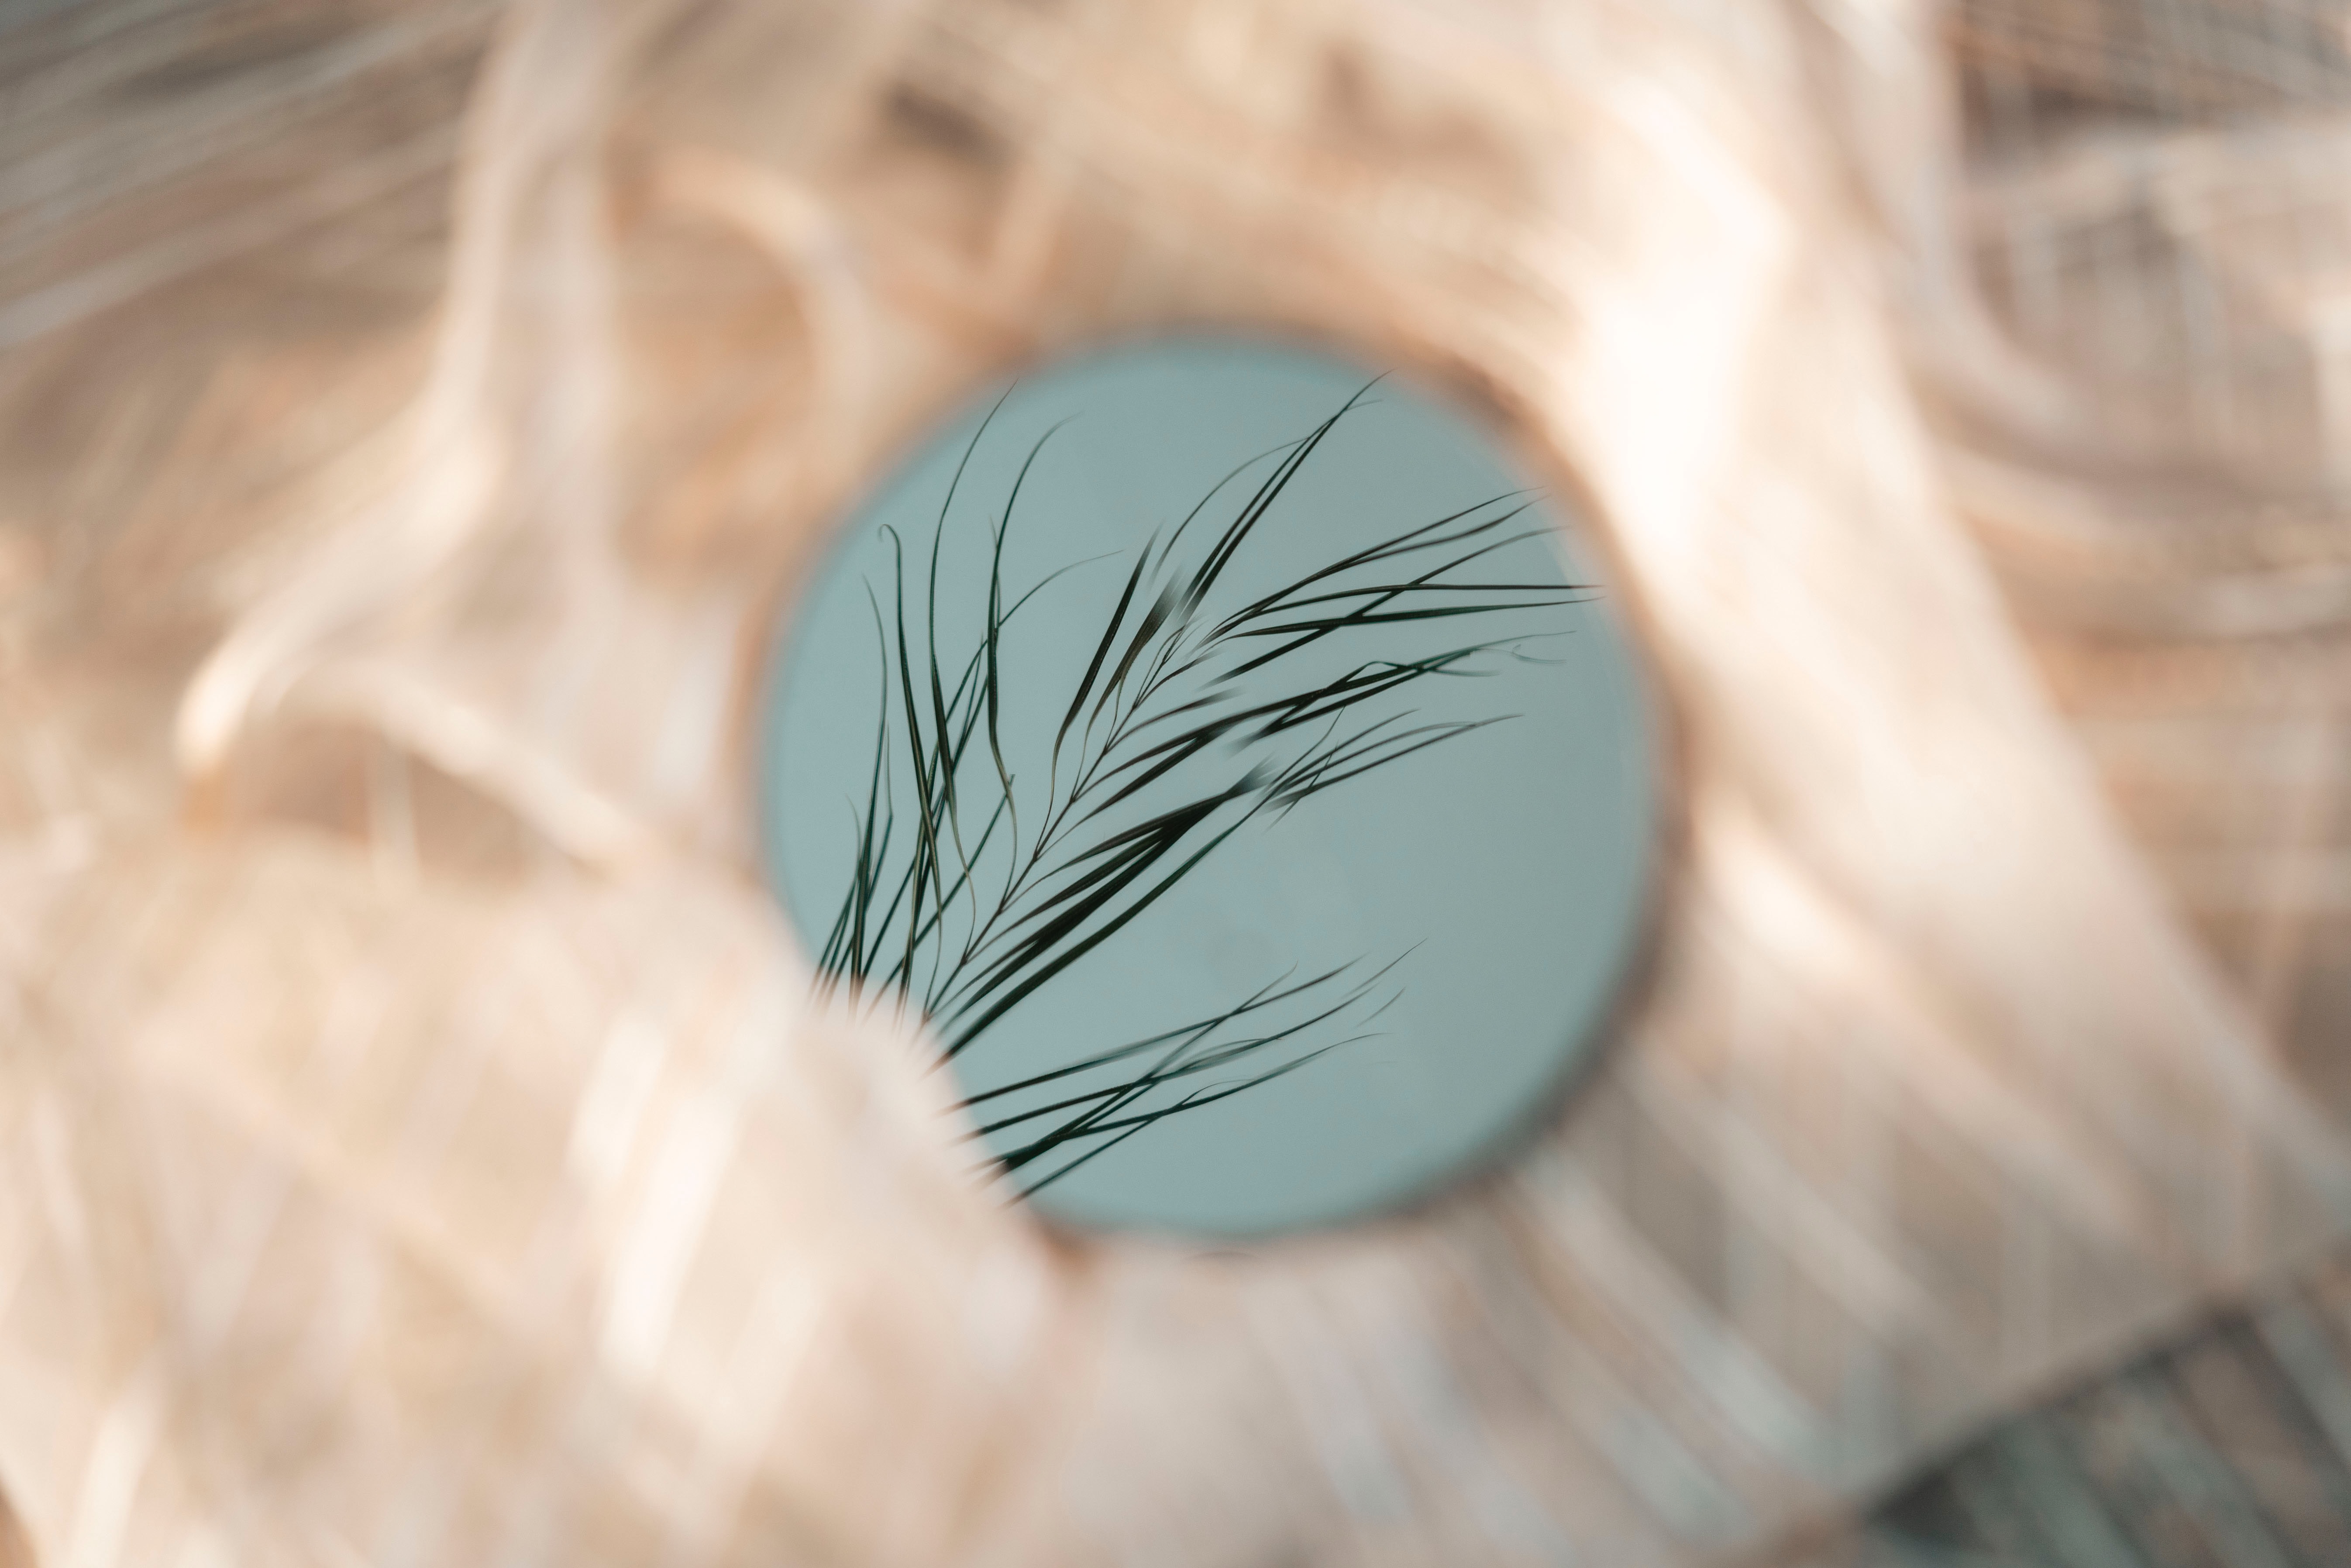 wallpapers focus, miscellaneous, grass, leaves, reflection, miscellanea, circle, mirror